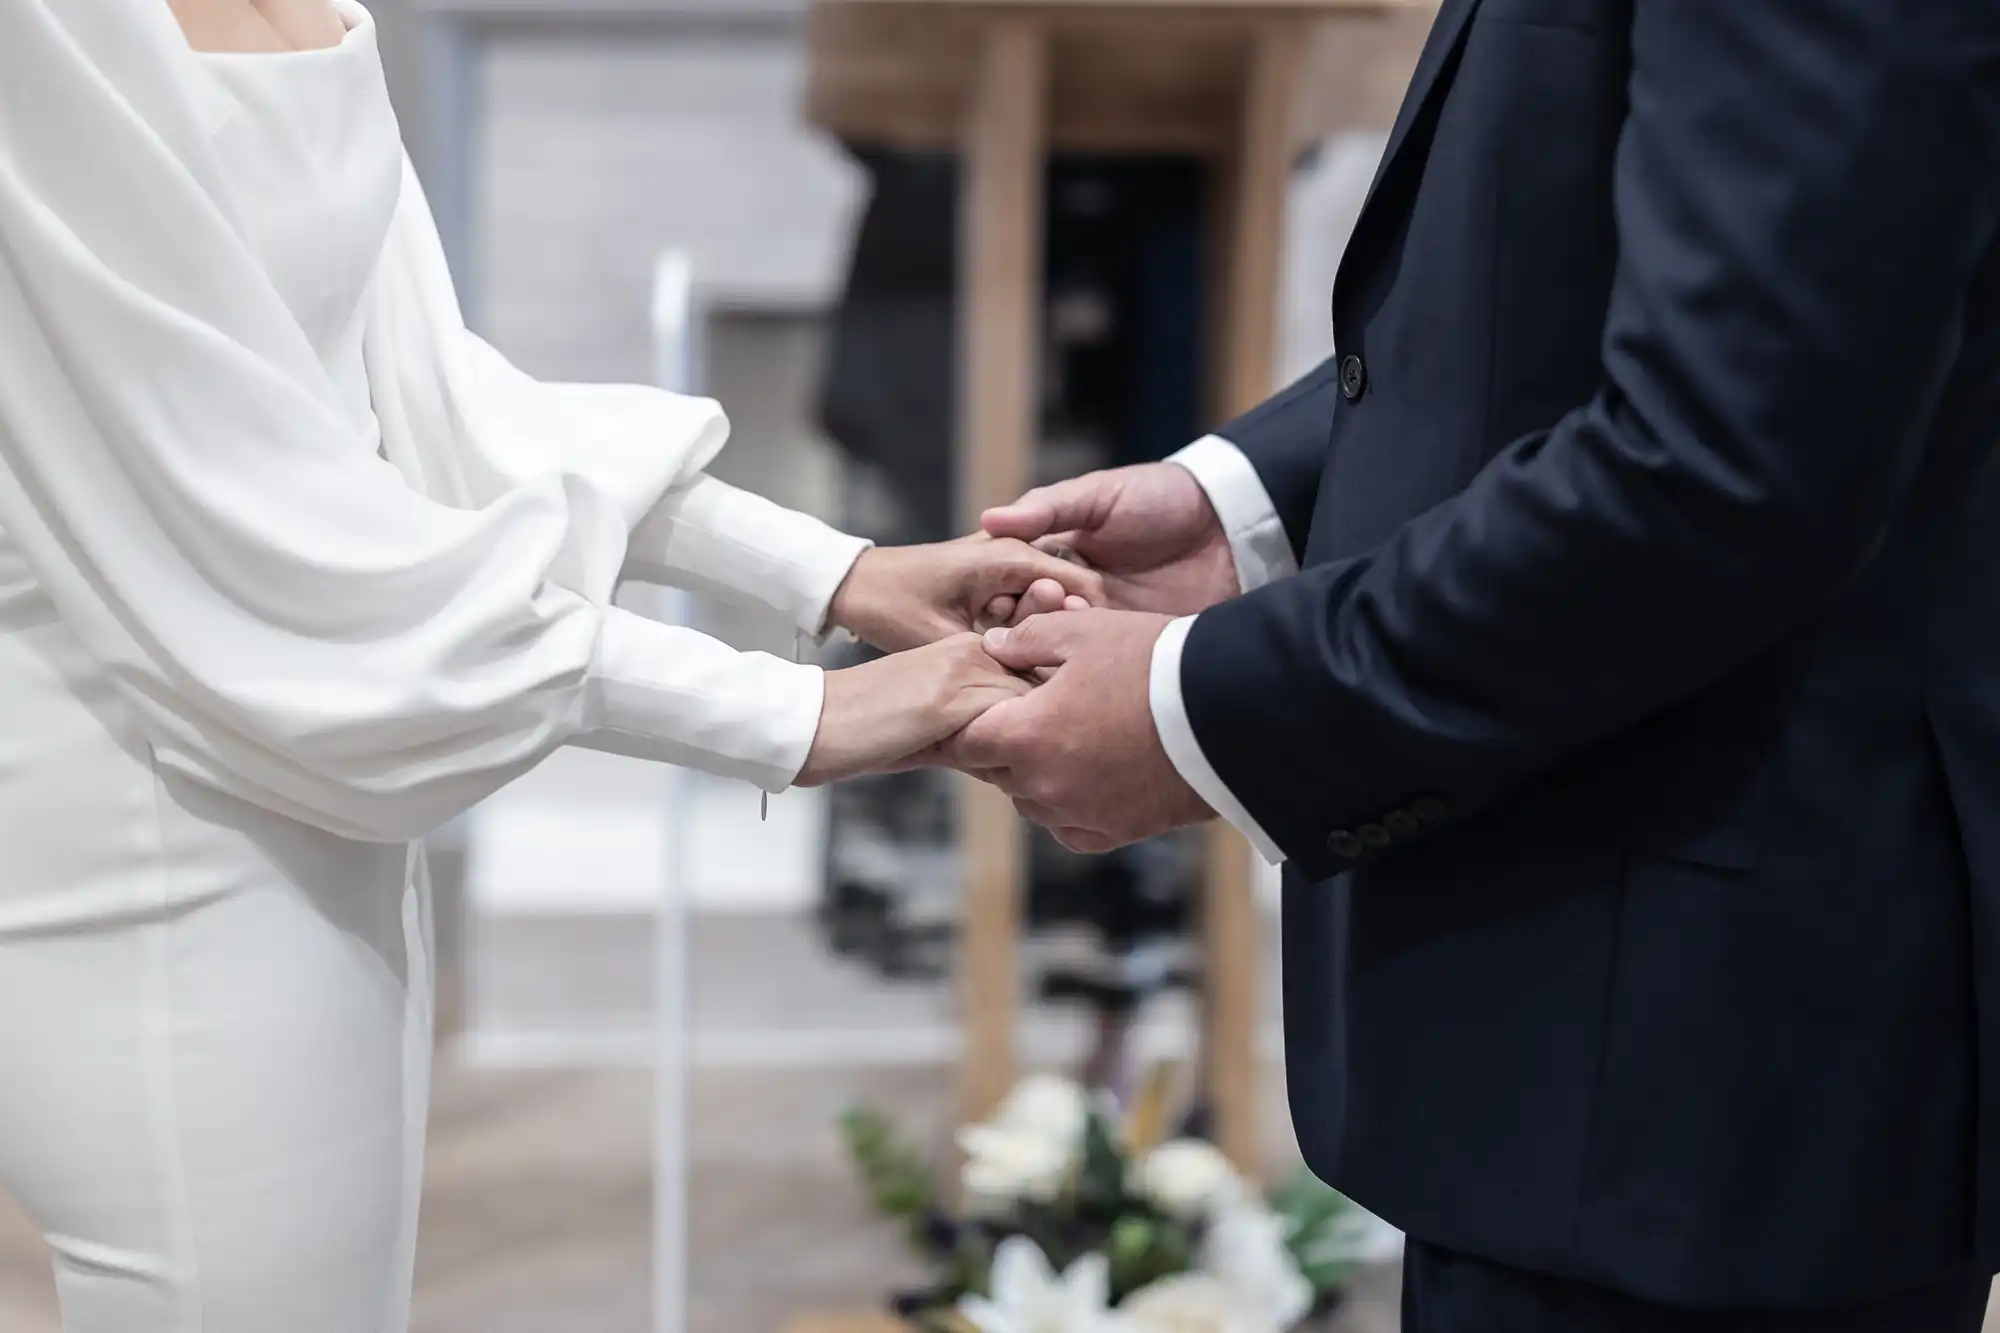 A bride and groom holding hands during a wedding ceremony, with a focus on their hands and blurred background.